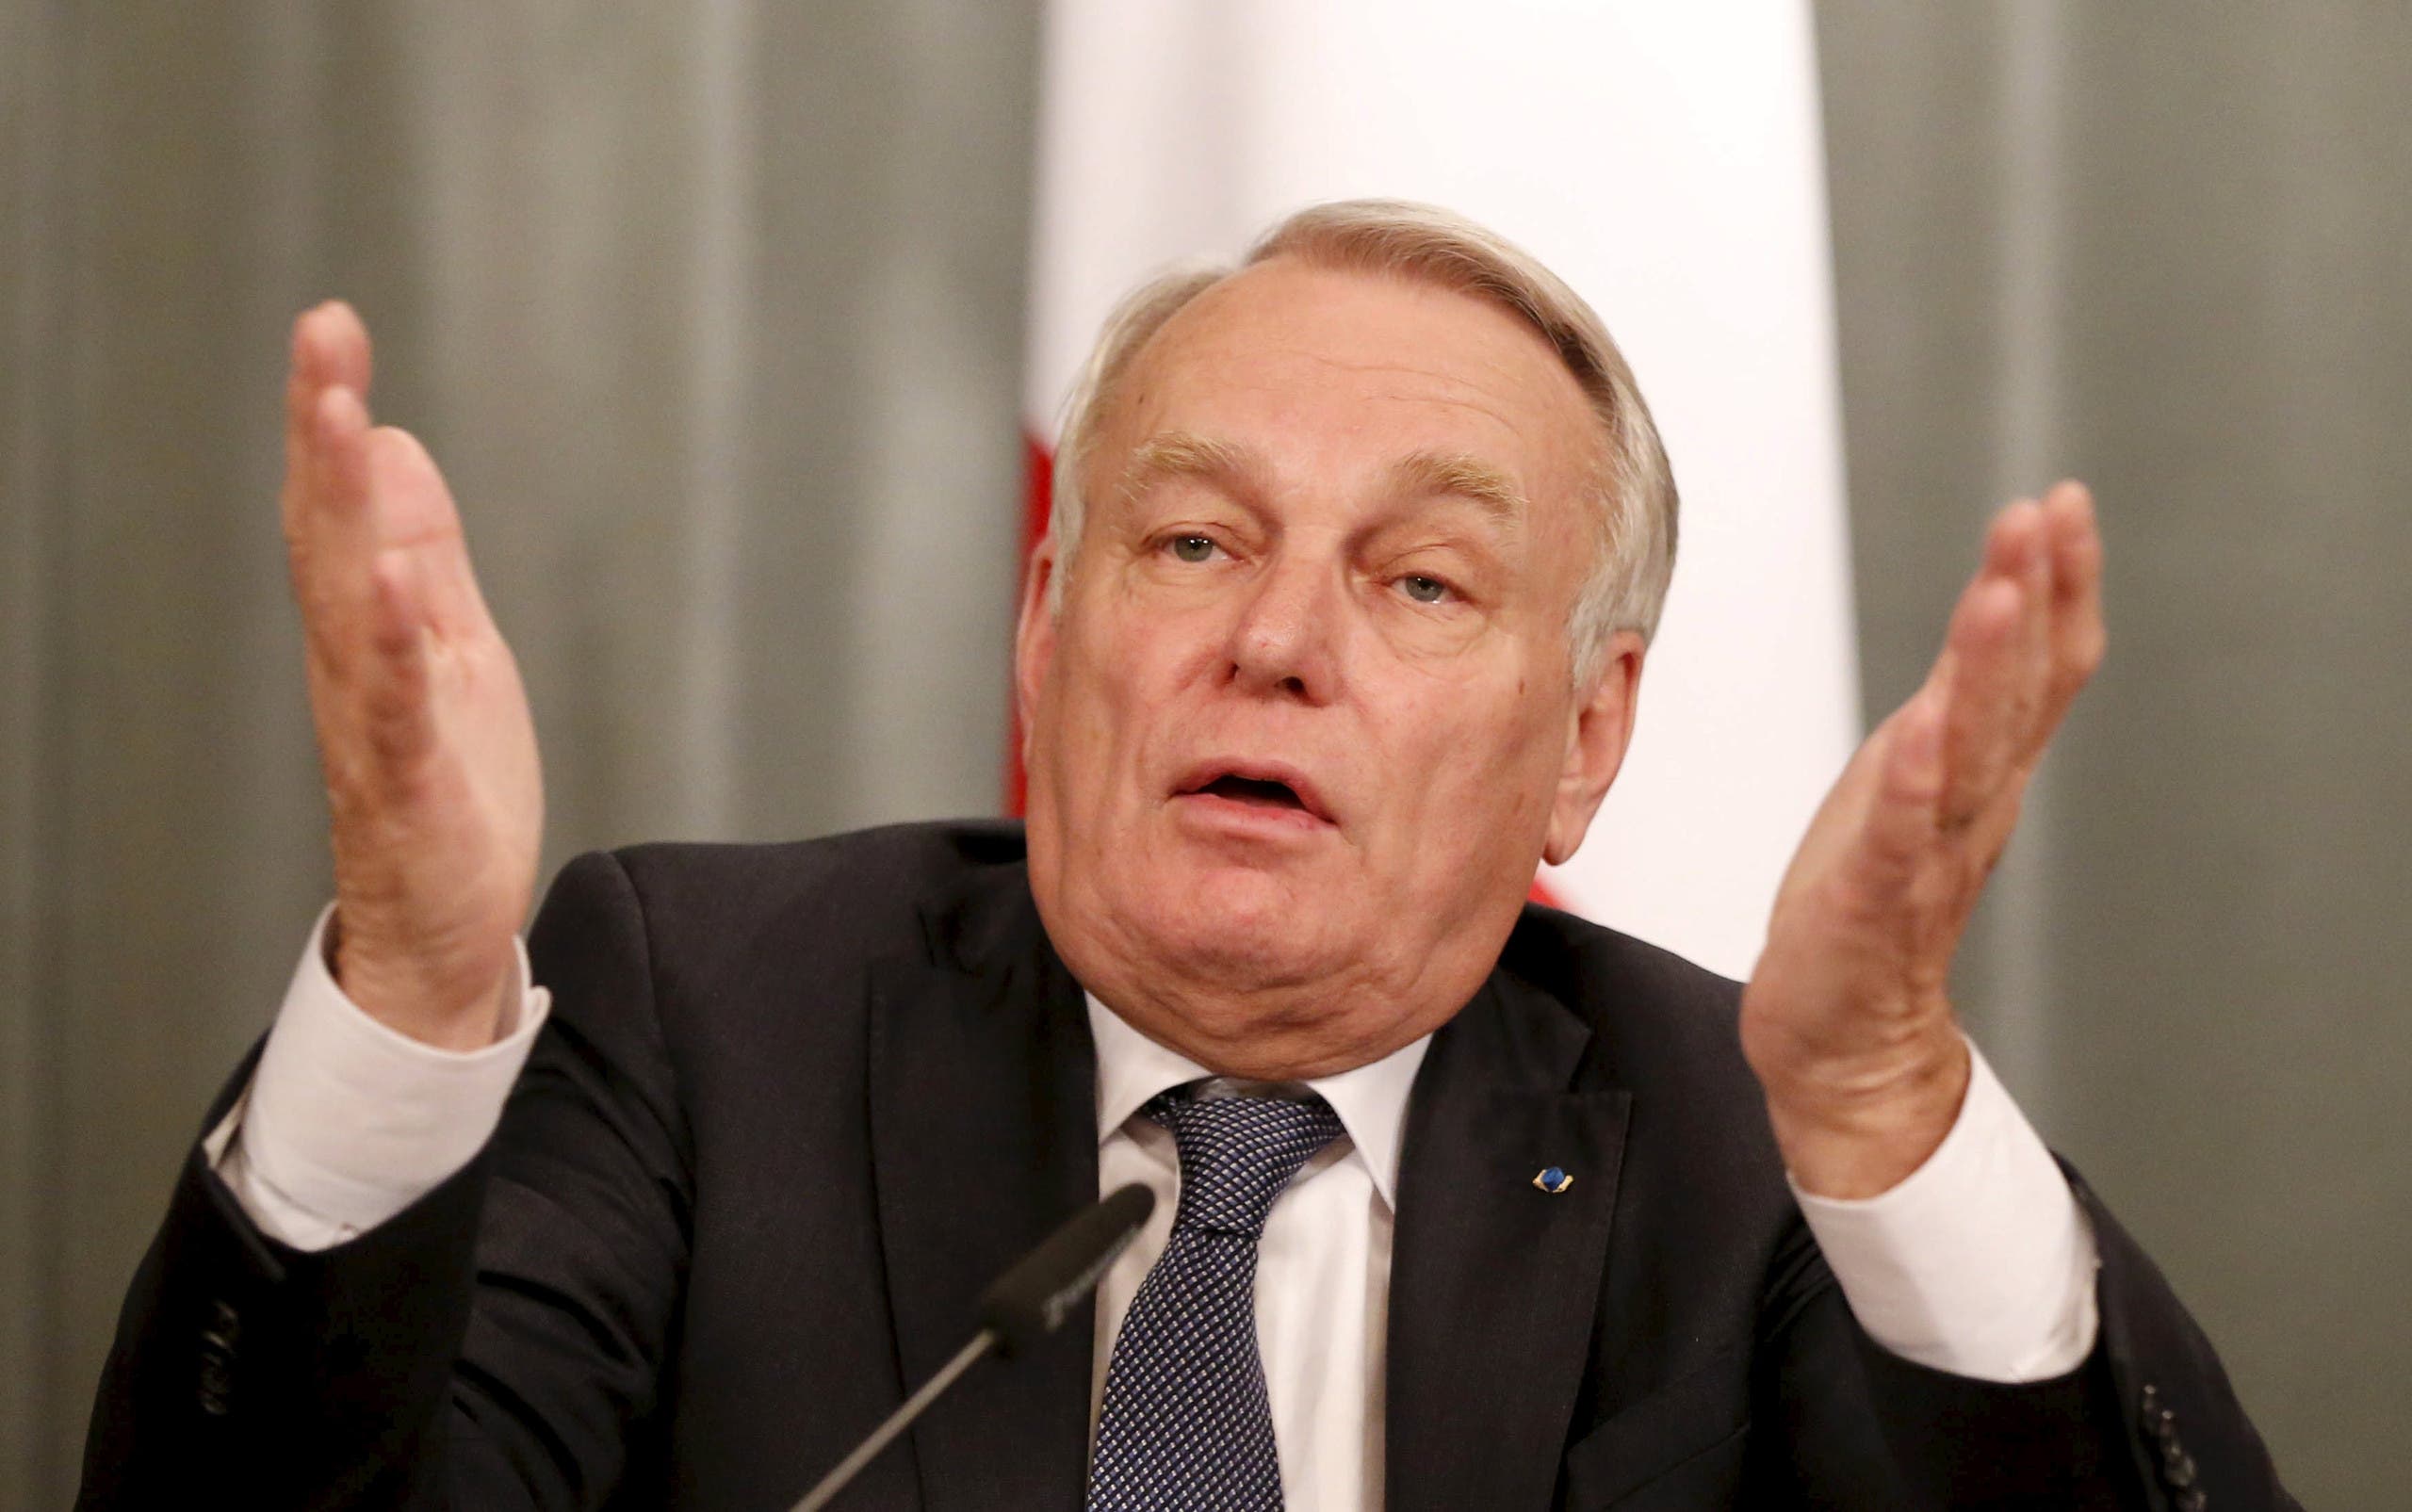 Jean-Marc Ayrault  reuters french foreign minister